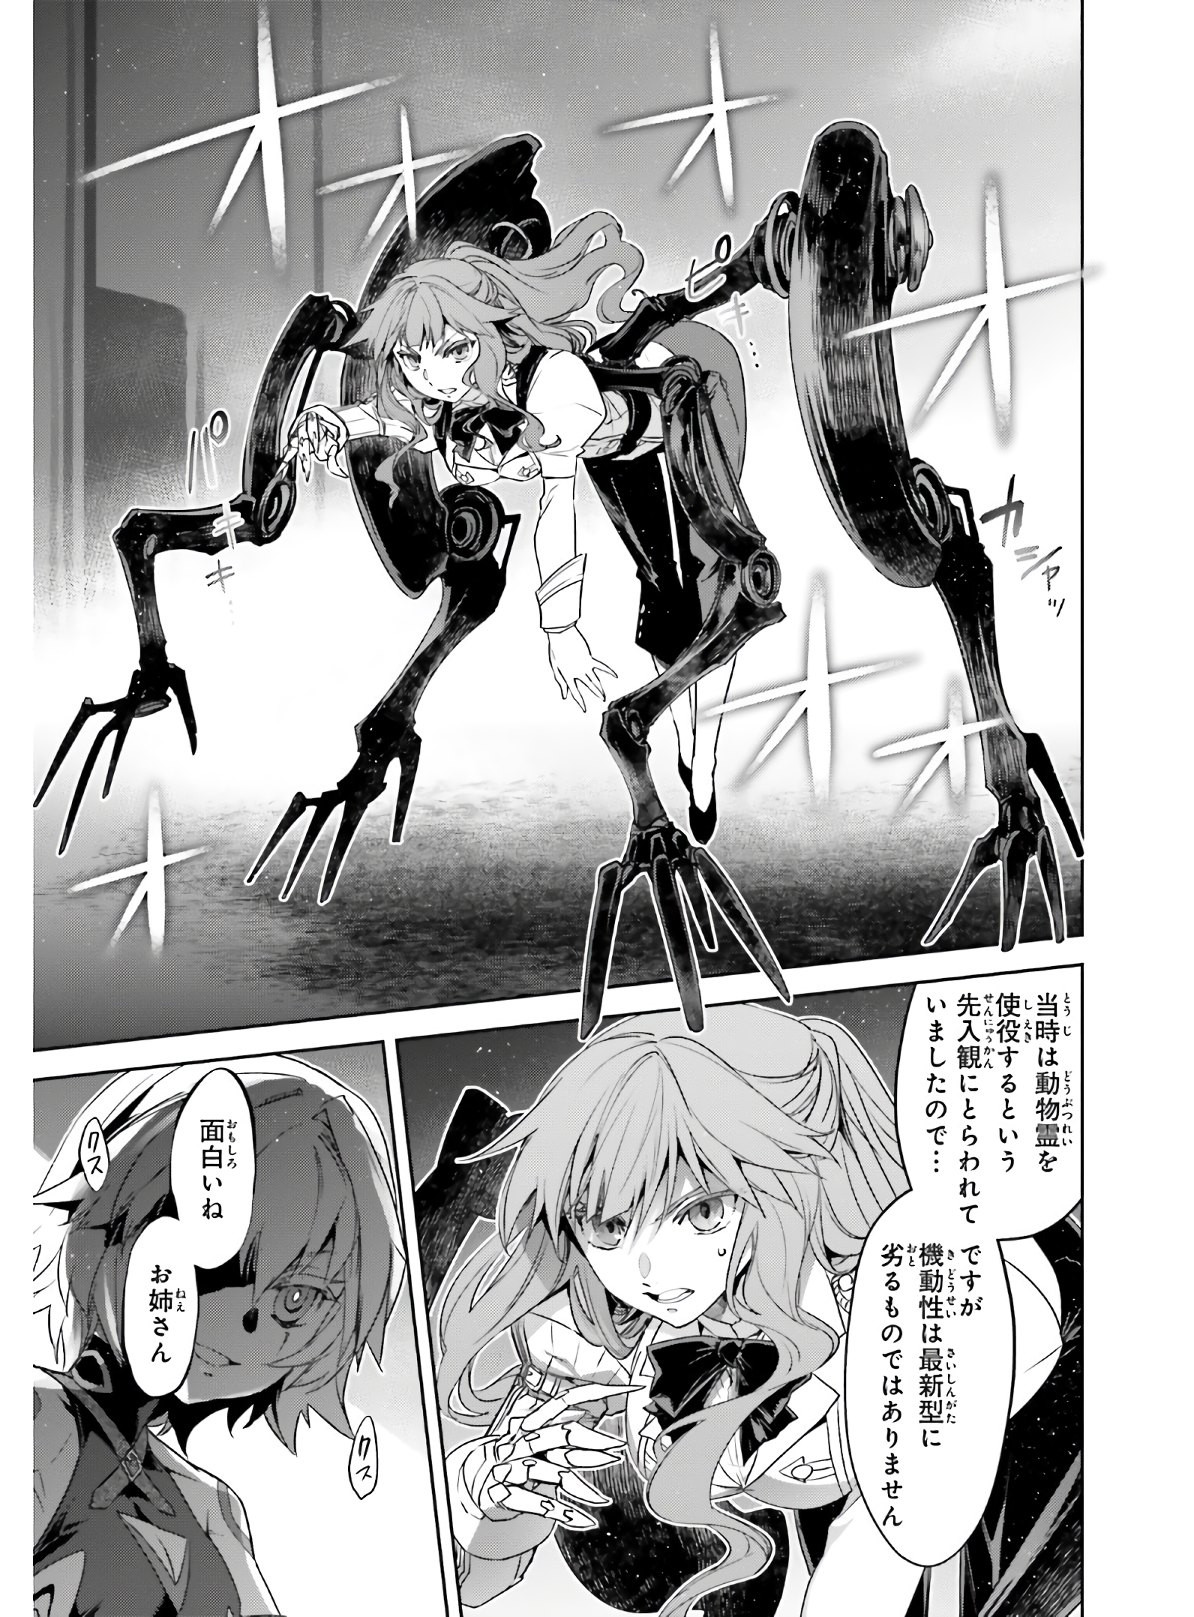 Fate-Apocrypha - Chapter 45-2 - Page 3